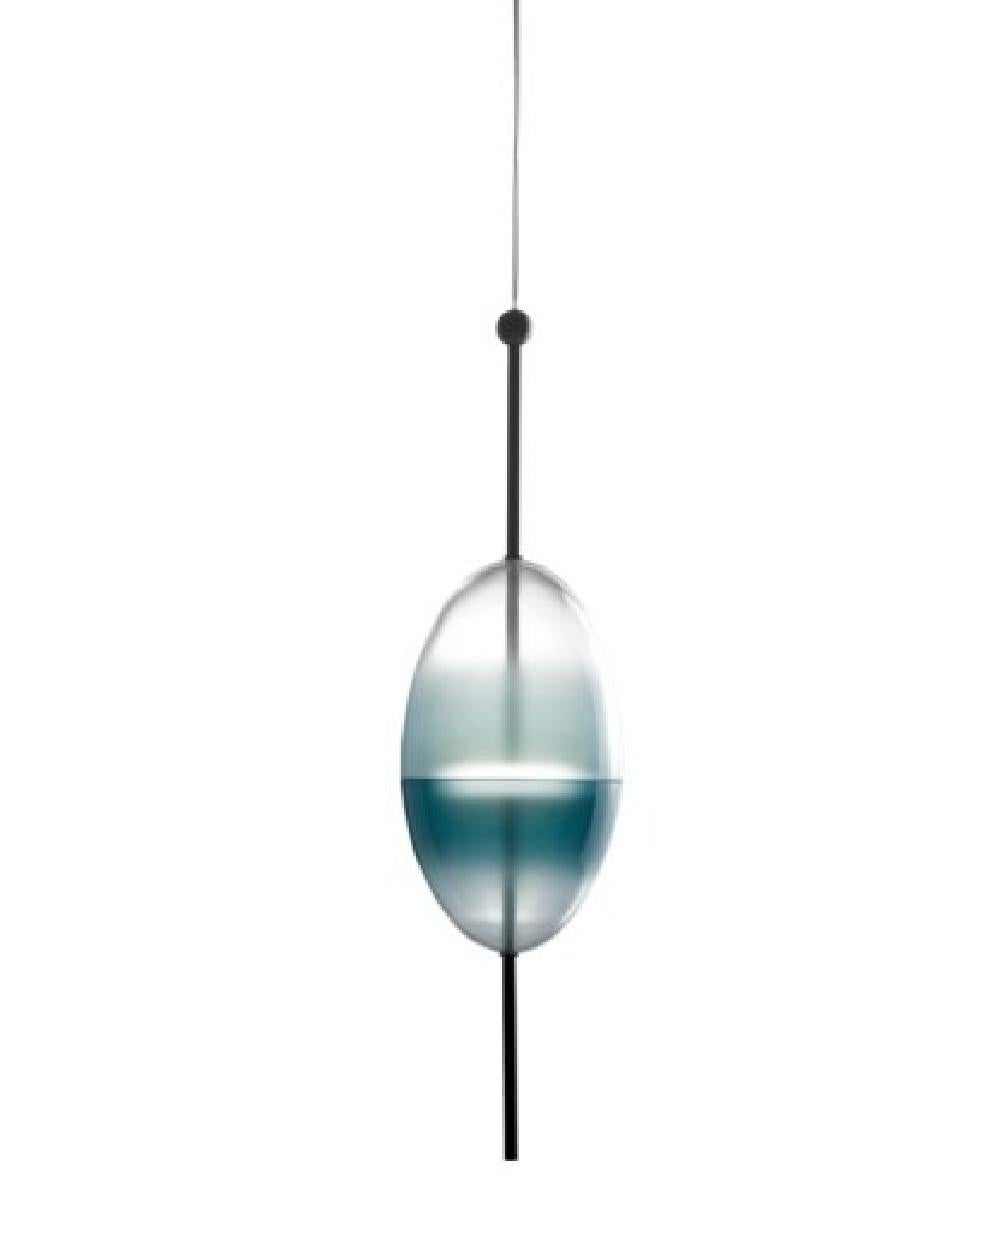 FLOW[T] S1 Pendant lamp in Turquoise by Nao Tamura for Wonderglass For Sale